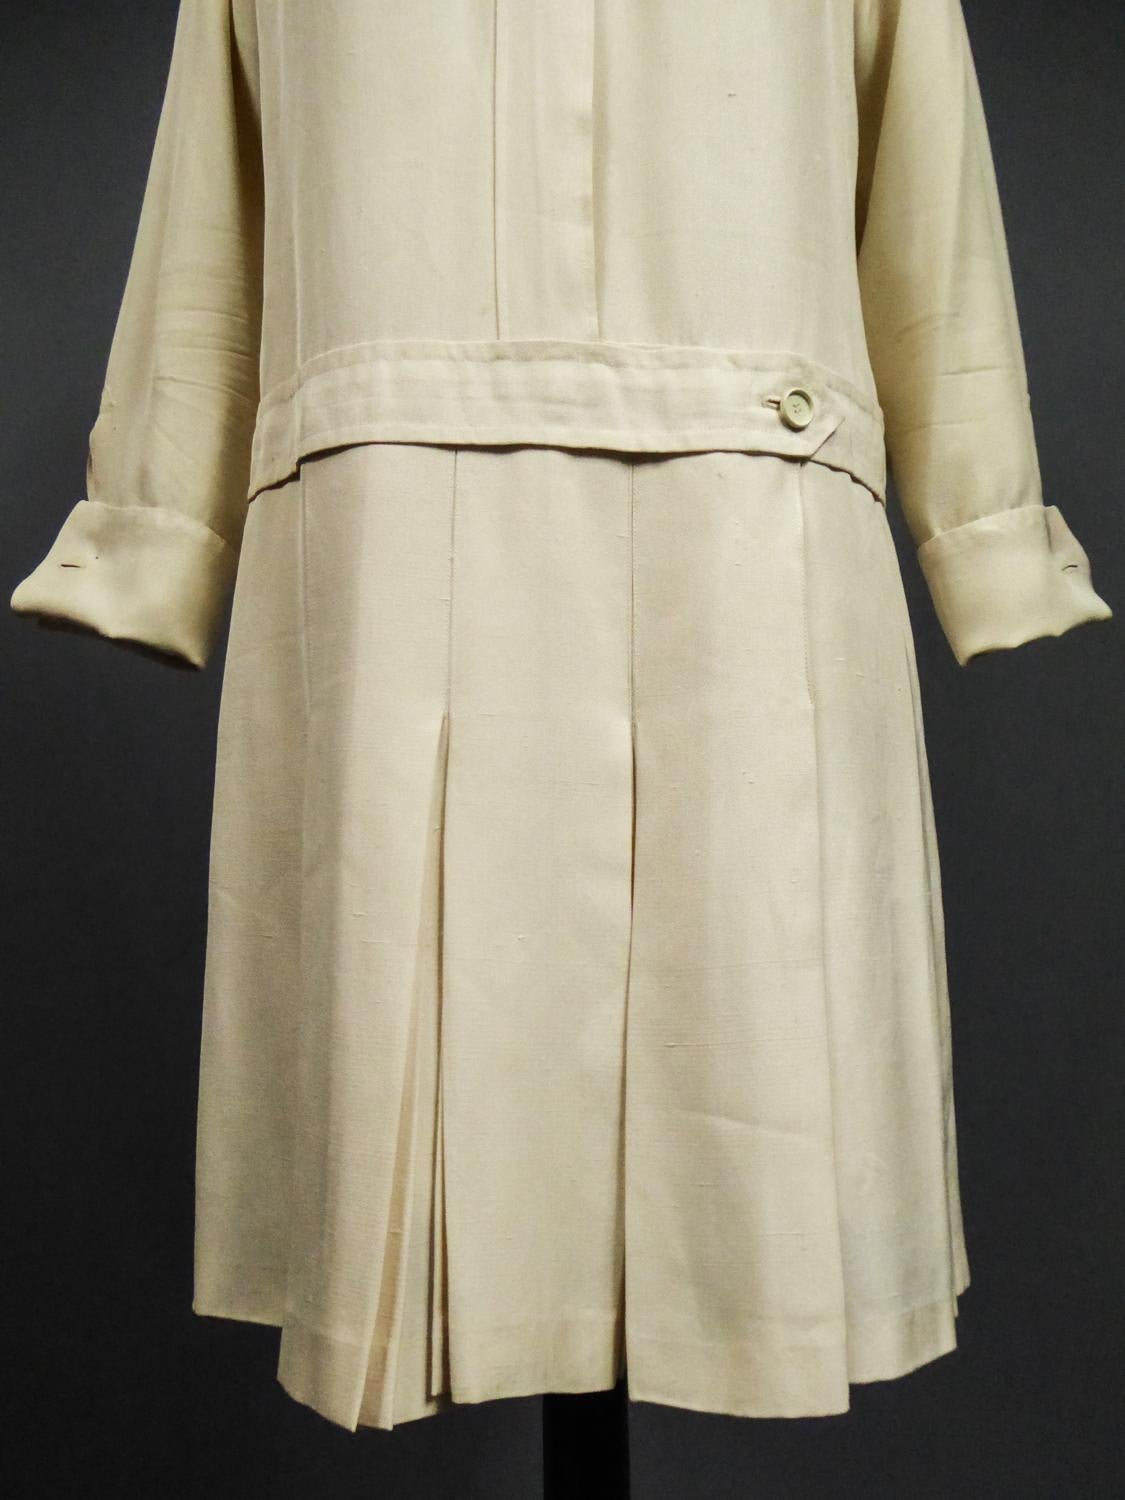 An Yves Saint Laurent Cocktail Dress Numbered 15193 - 1965 Collection 4